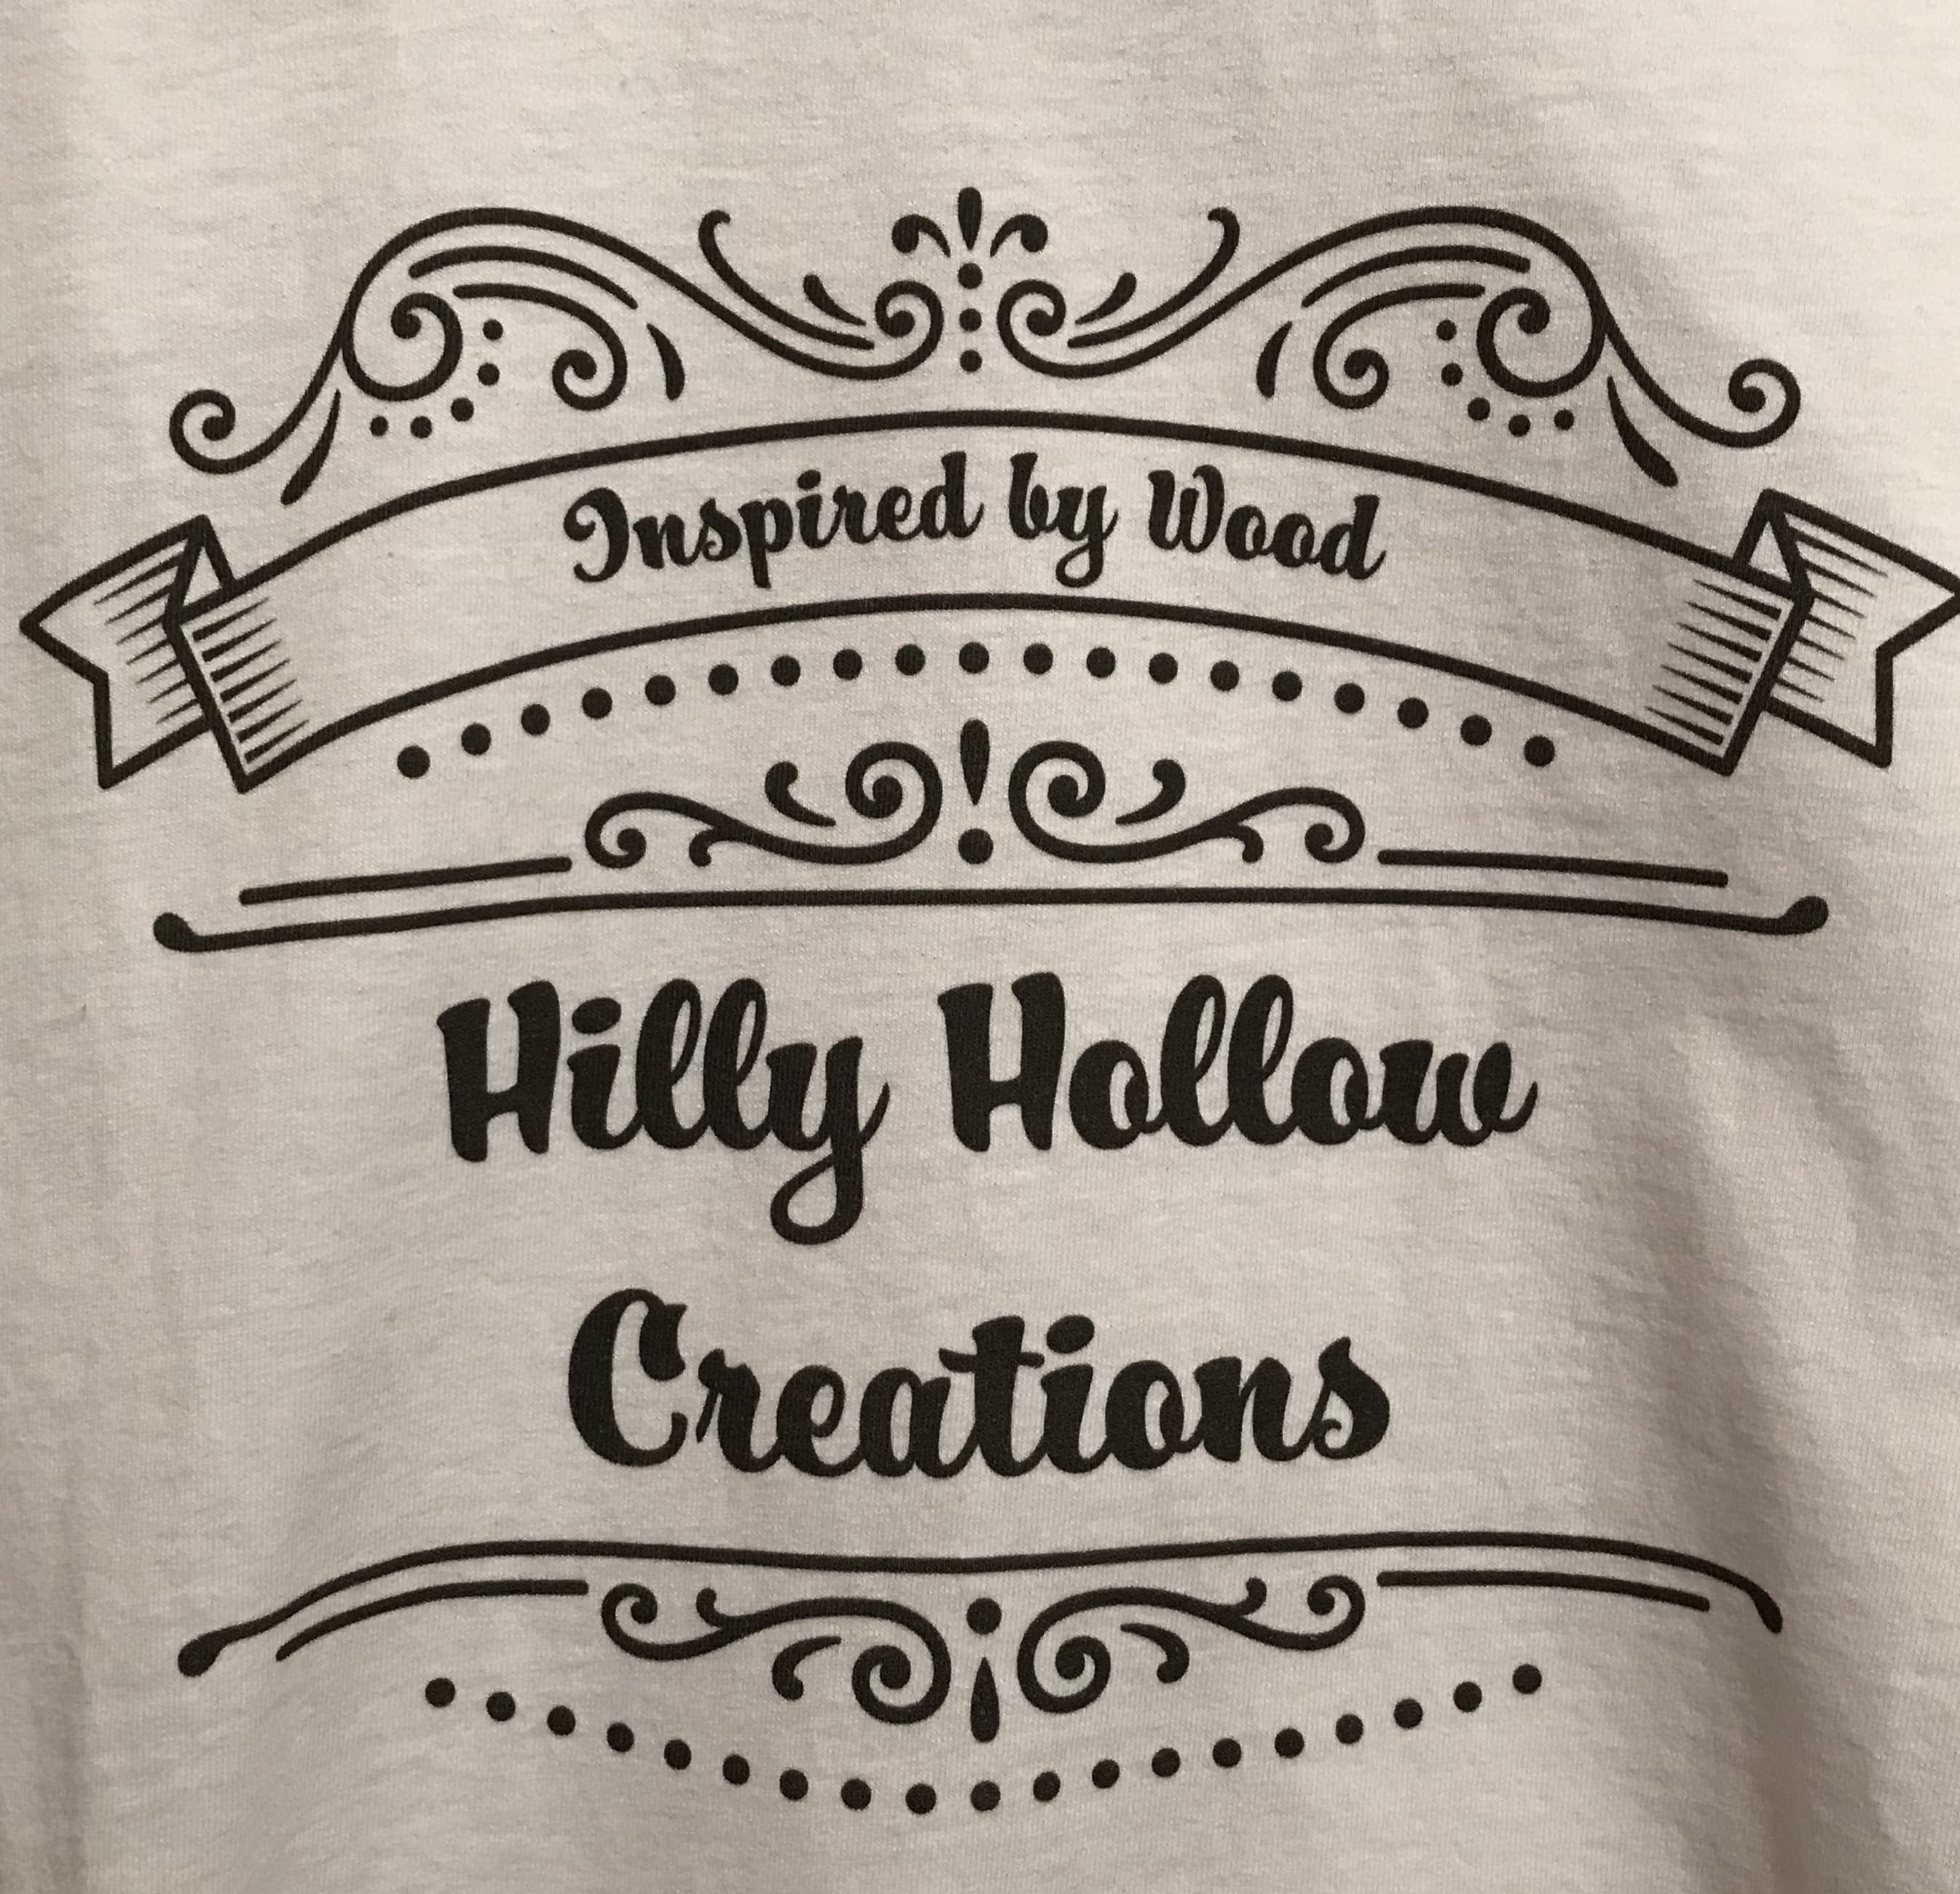 Hilly Hollow Creations